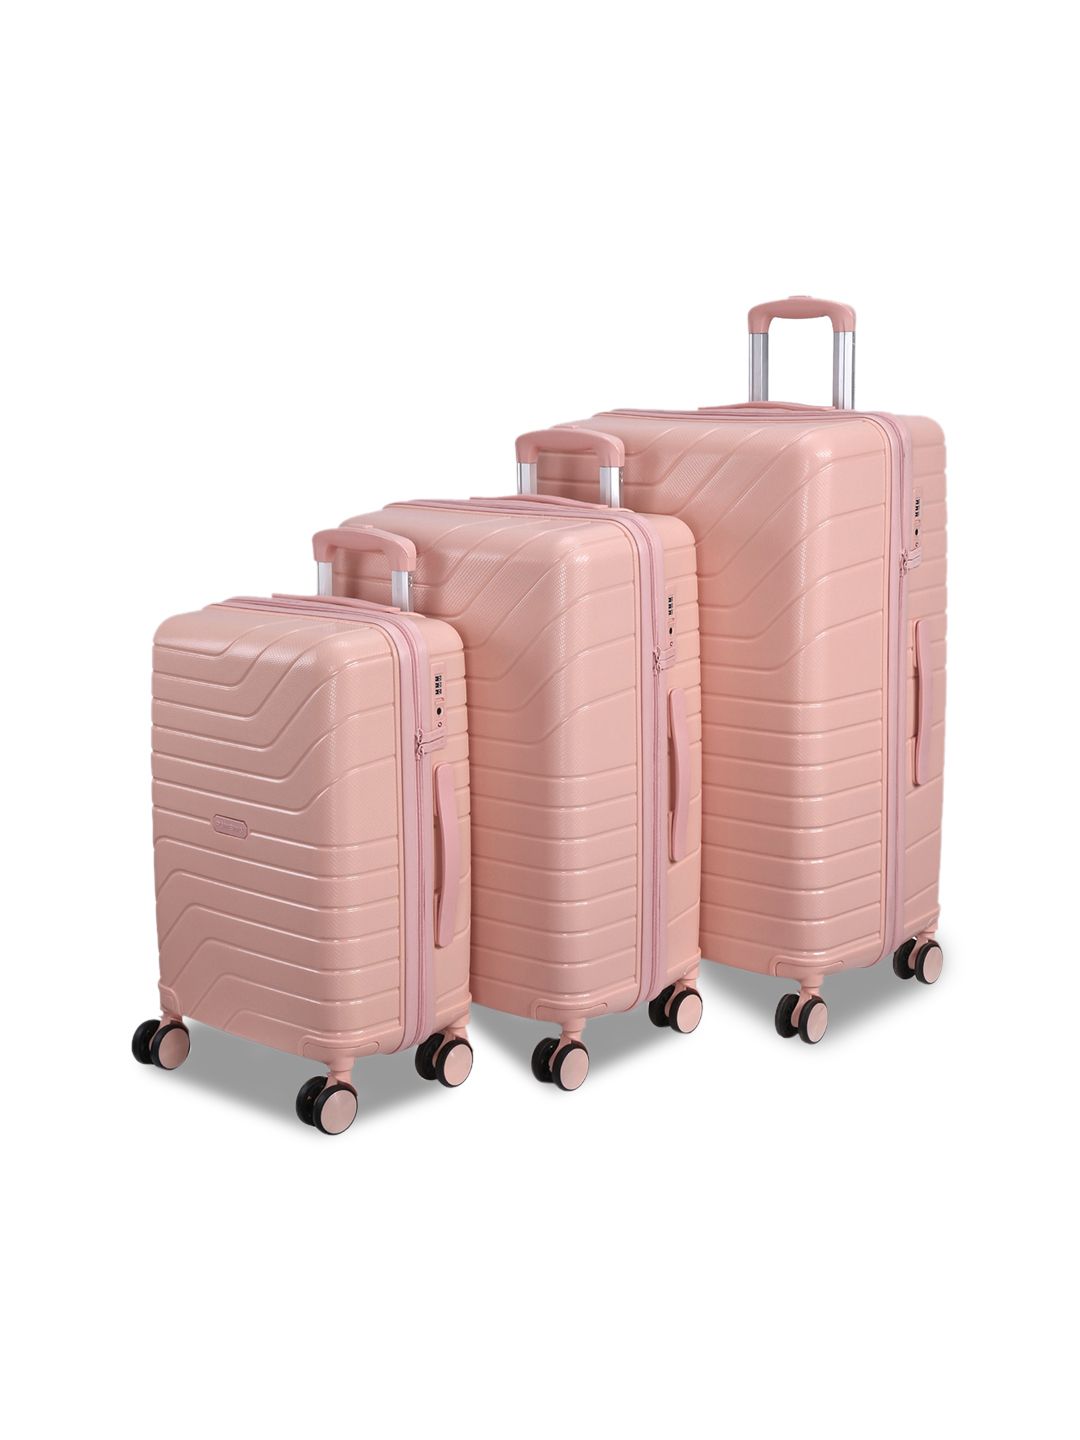 ROMEING Tuscany Set Of 3 Pink Textured Hard-Sided Polypropylene Trolley Suitcases Price in India